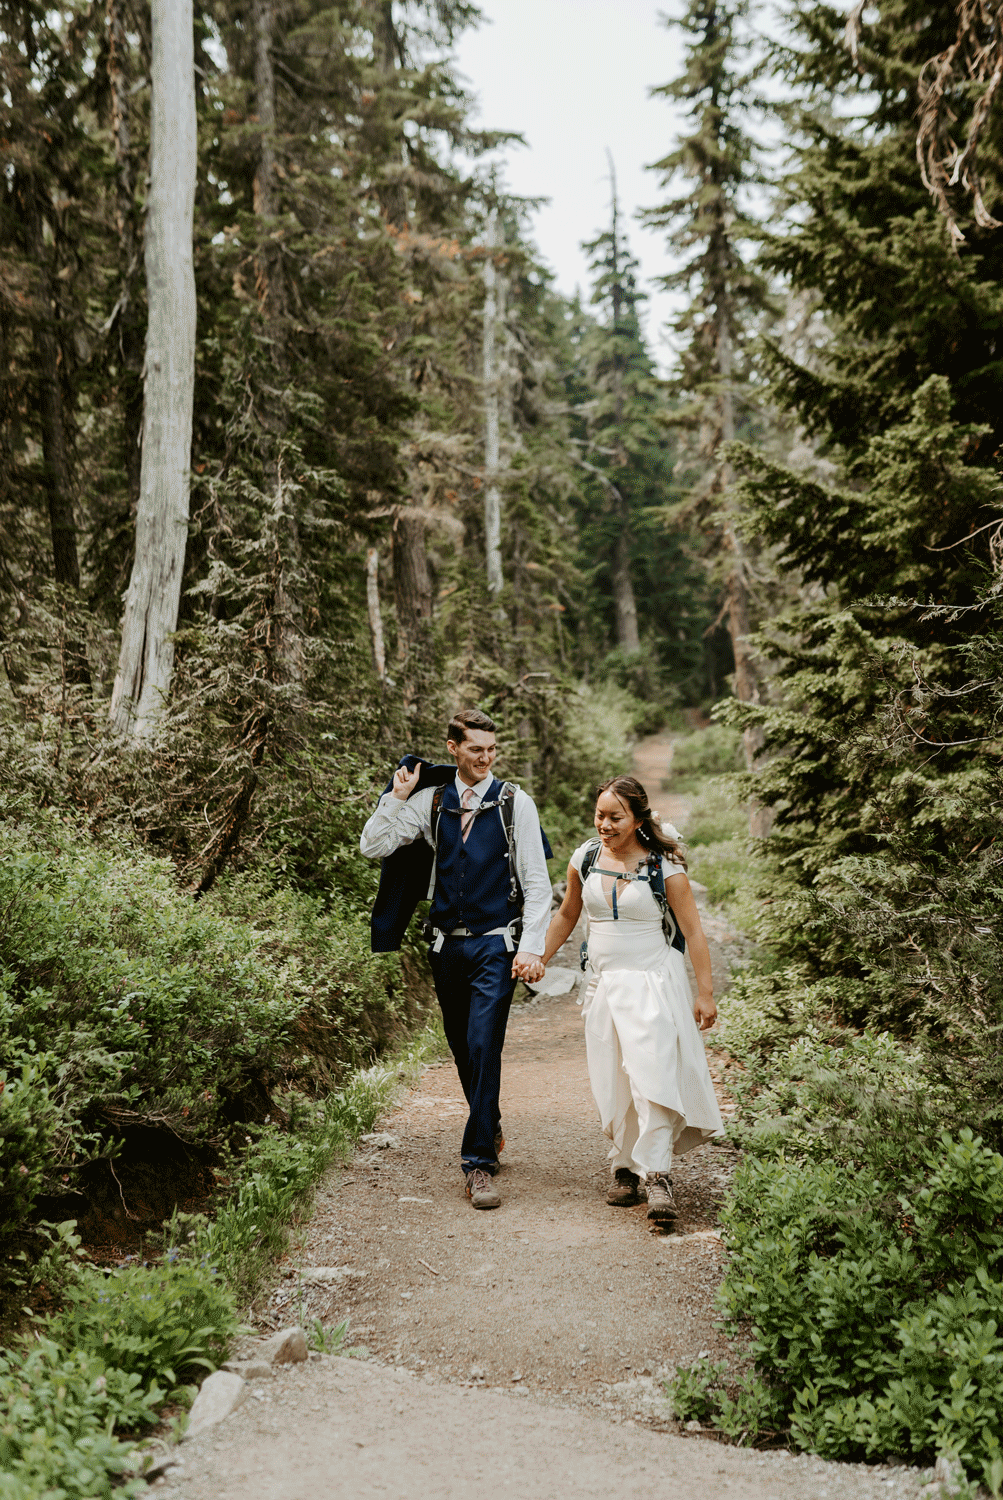 Gif photo of a bride and groom walking down a trail in the forest